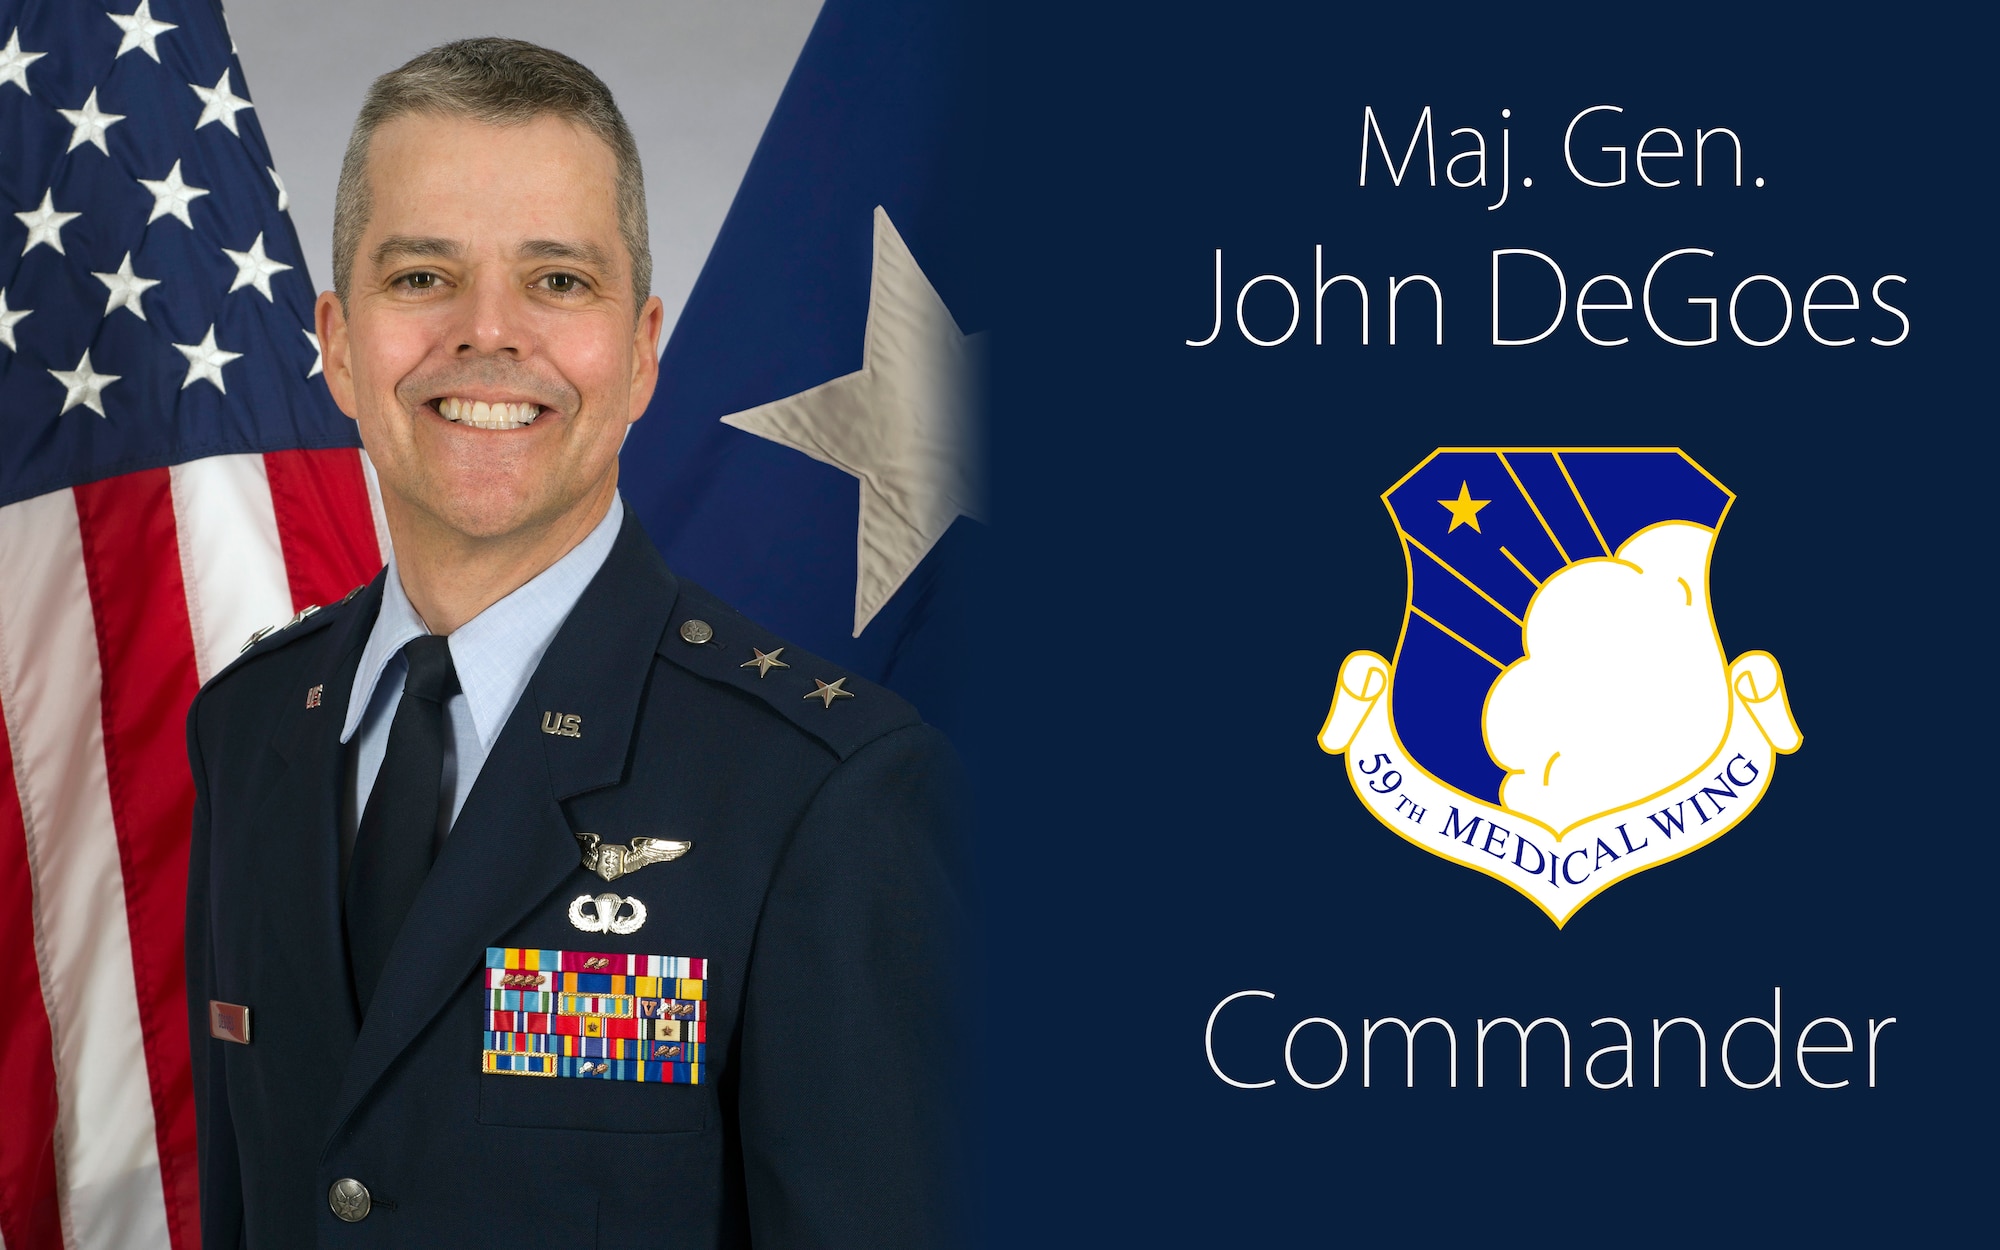 Maj. Gen. John DeGoes took command of the 59th Medical Wing during a ceremony on Joint Base San Antonio-Lackland, June 14. The 59th MDW is the Air Force's premier healthcare, medical education and research, and readiness wing. (U.S. Air Force illustration by Staff Sgt. William Blankenship)